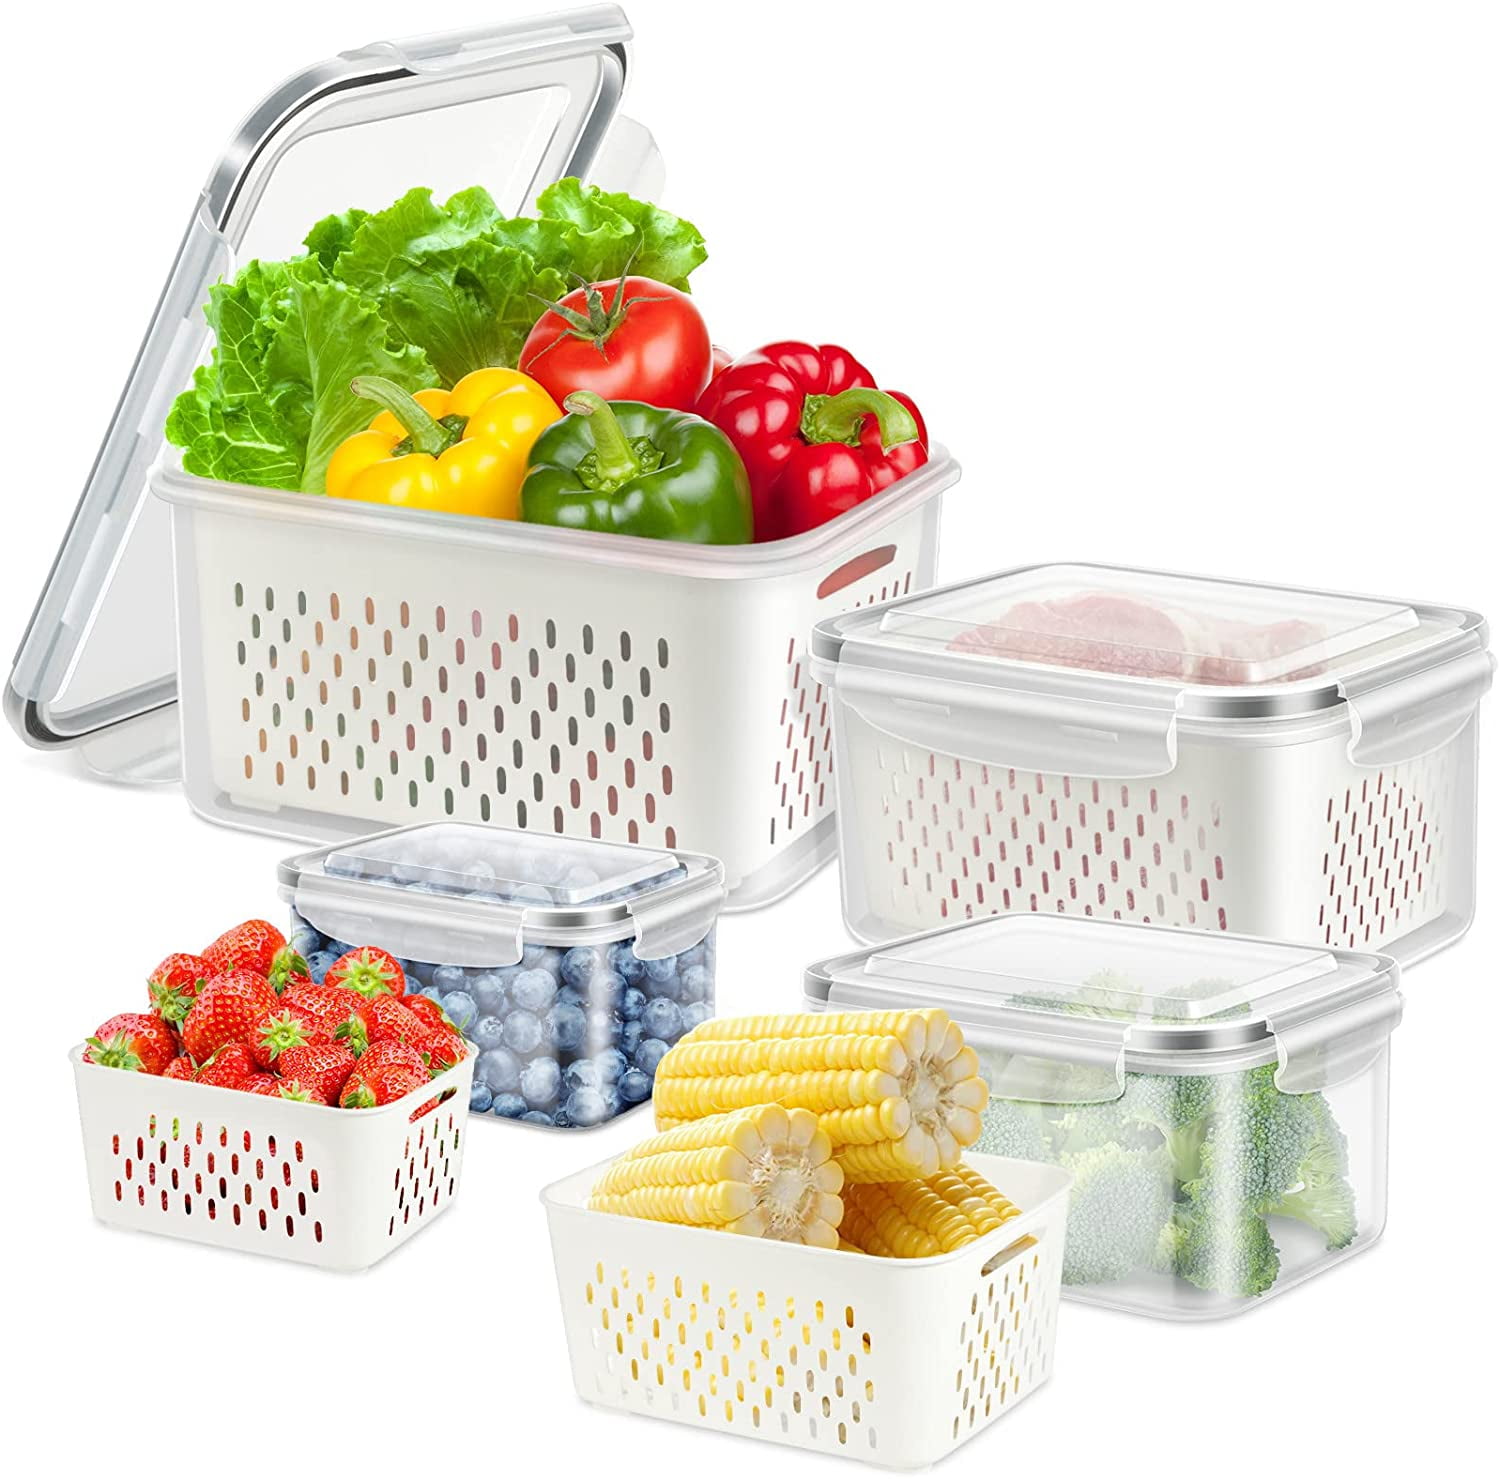 Coopbenpt Fruit Vegetable Food Storage Containers for Fridge, 3